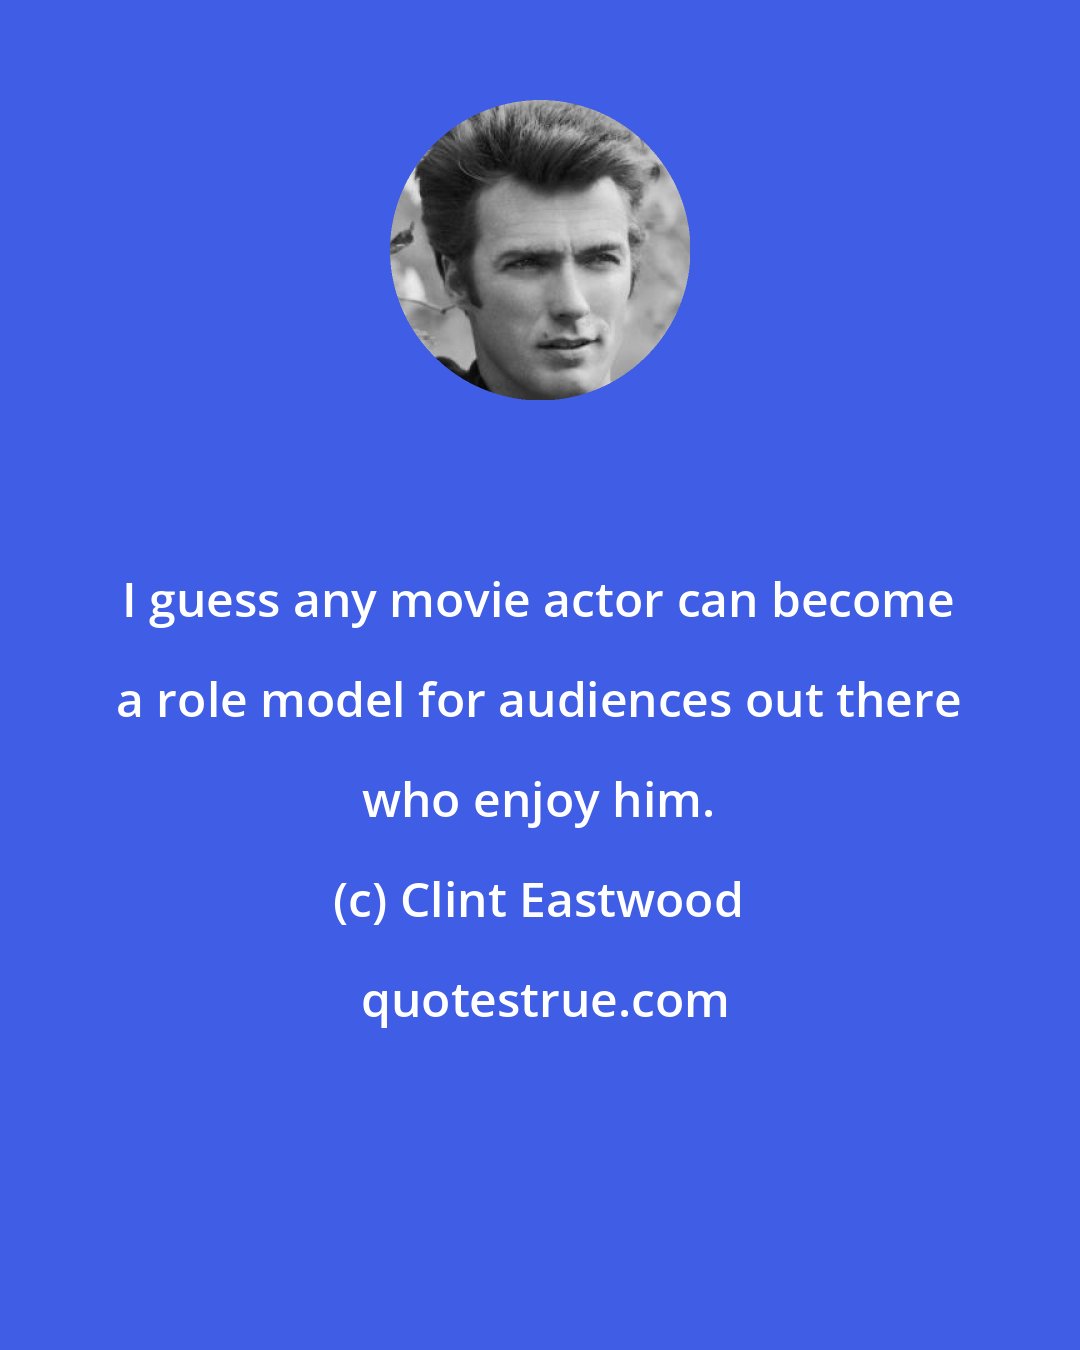 Clint Eastwood: I guess any movie actor can become a role model for audiences out there who enjoy him.